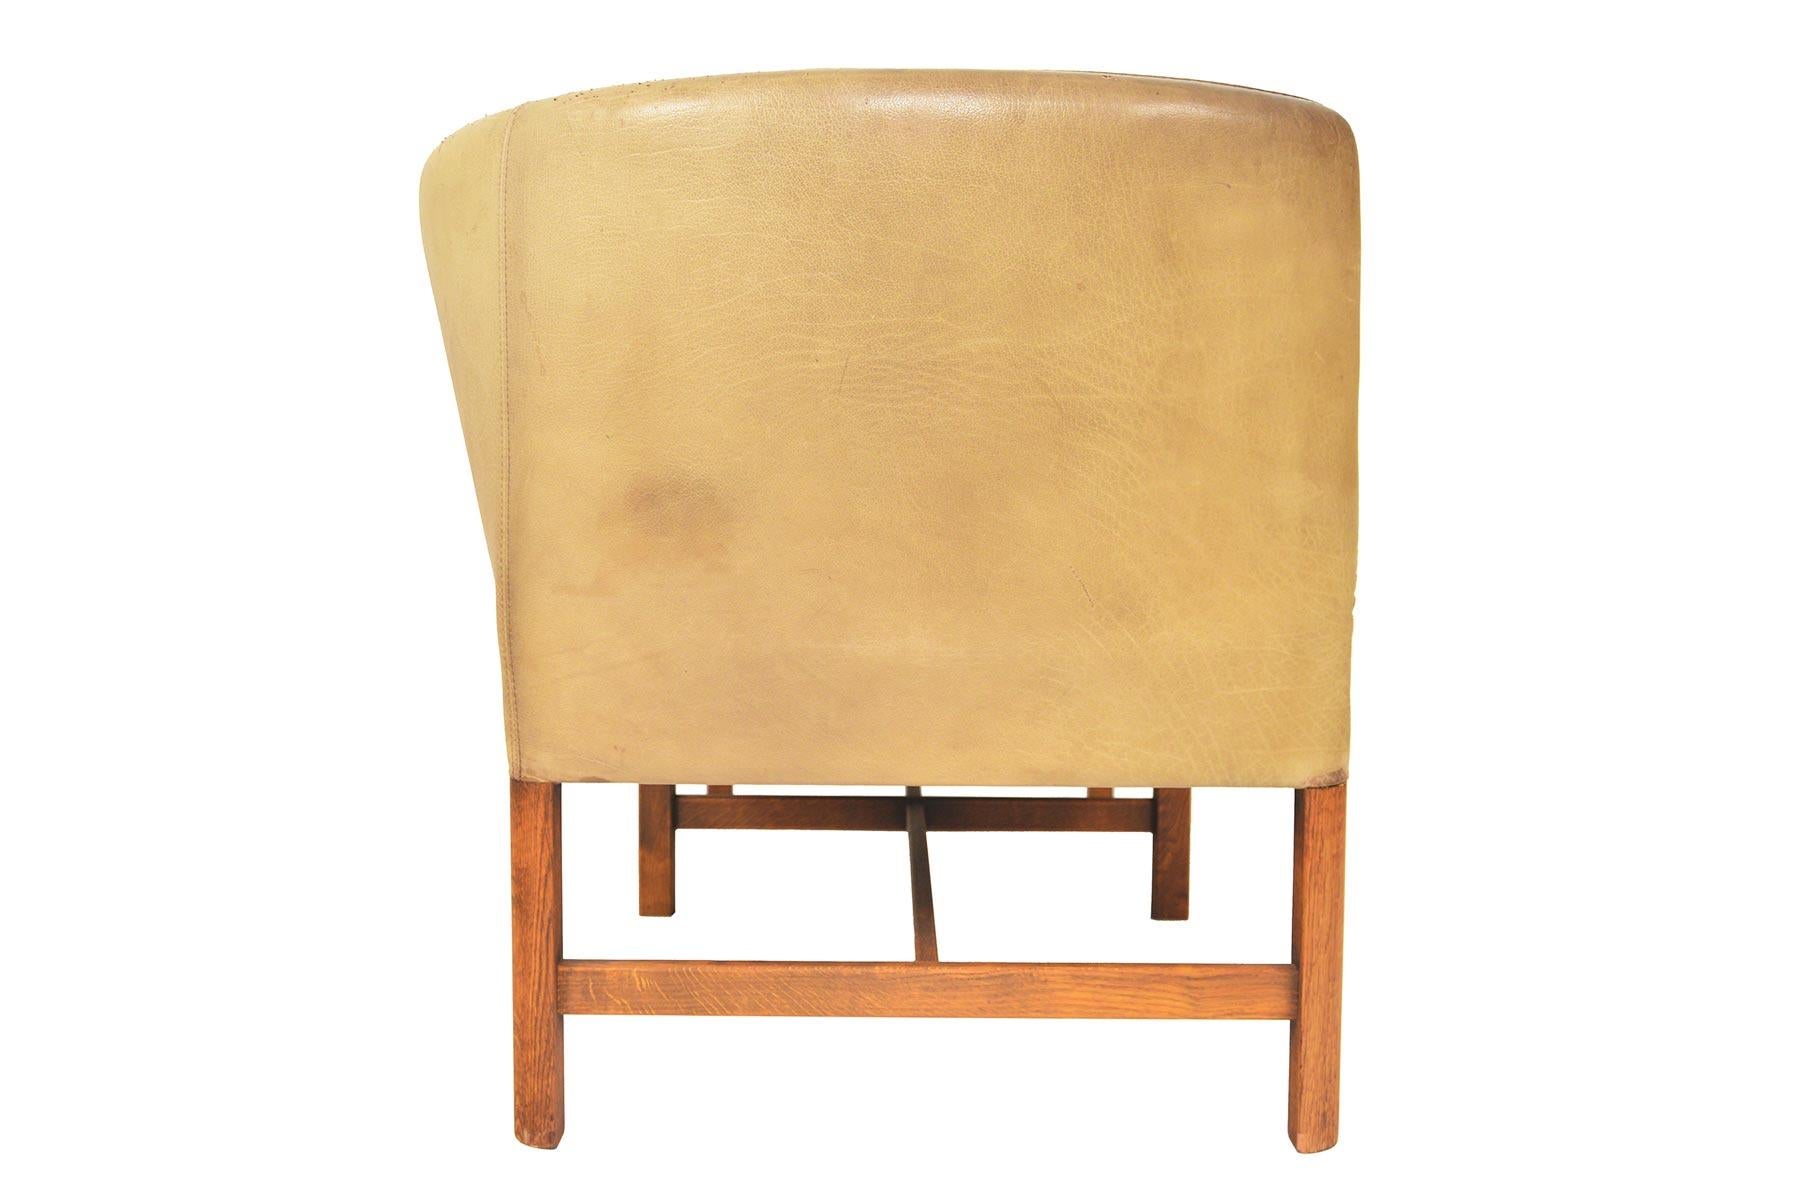 20th Century Danish Modern Curved Leather and Oak Loveseat